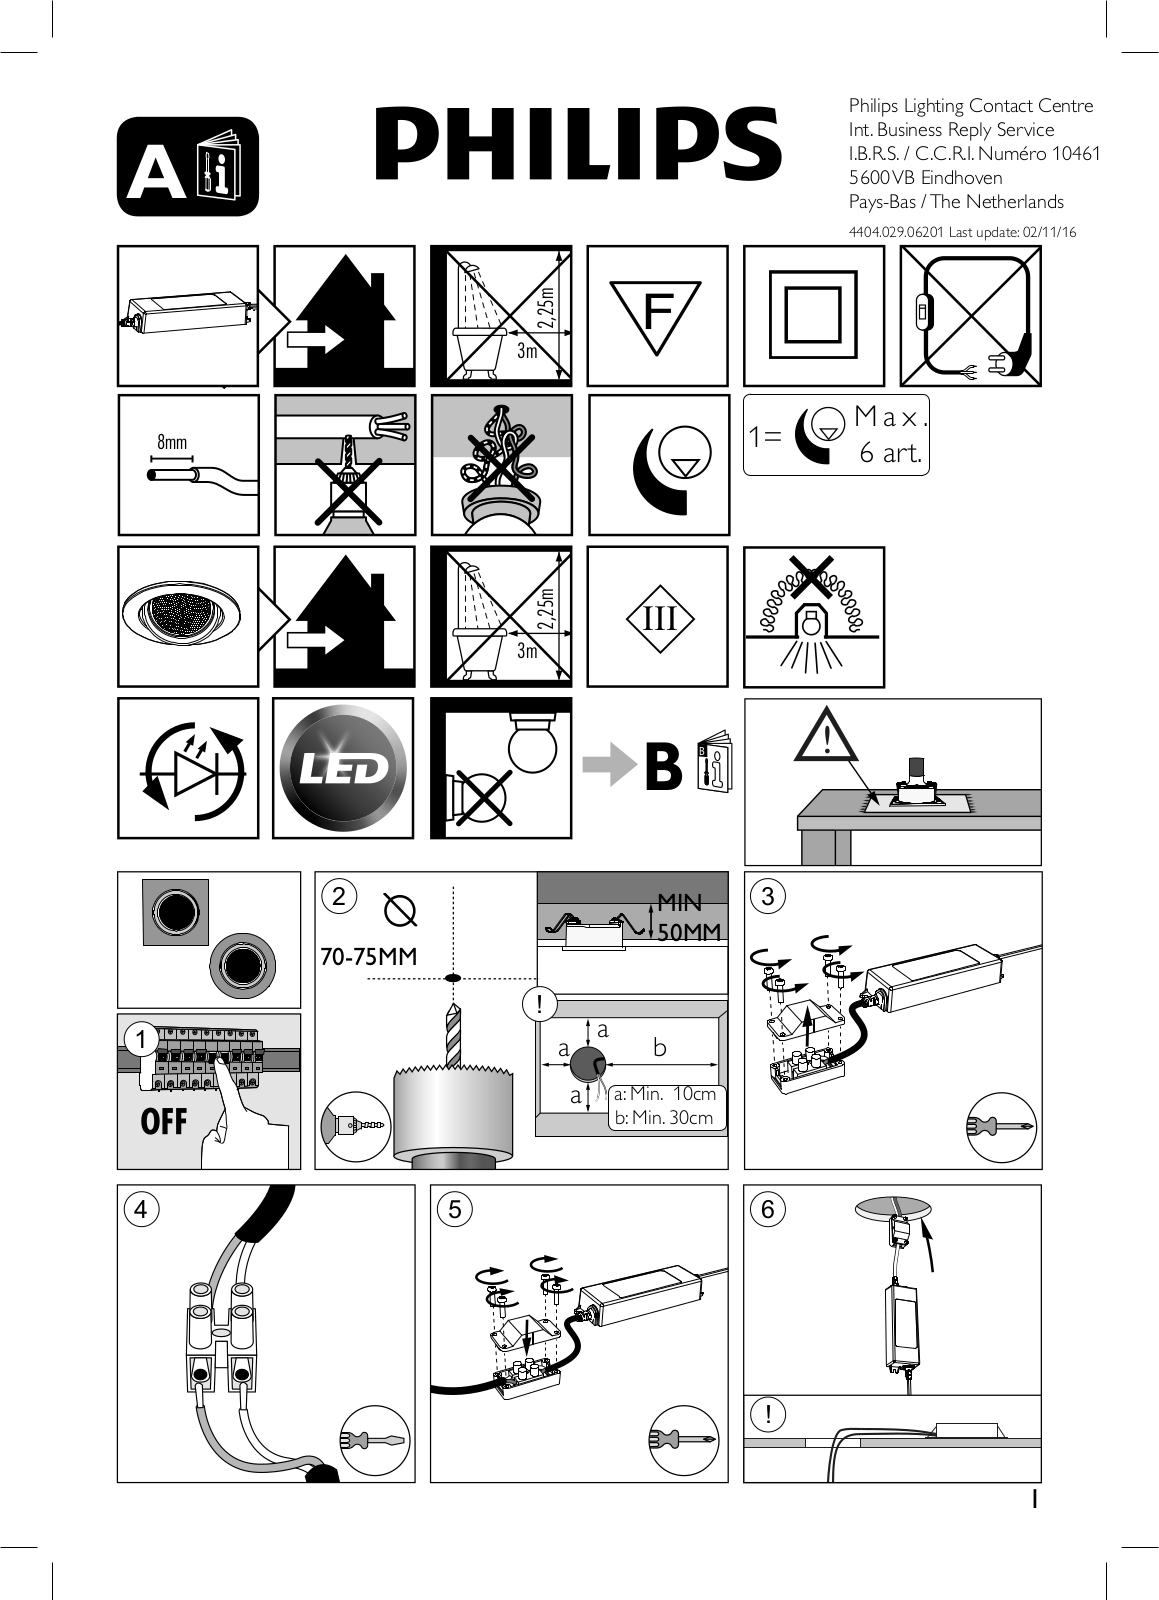 Philips Lighting Contact Centre Assembly Instructions